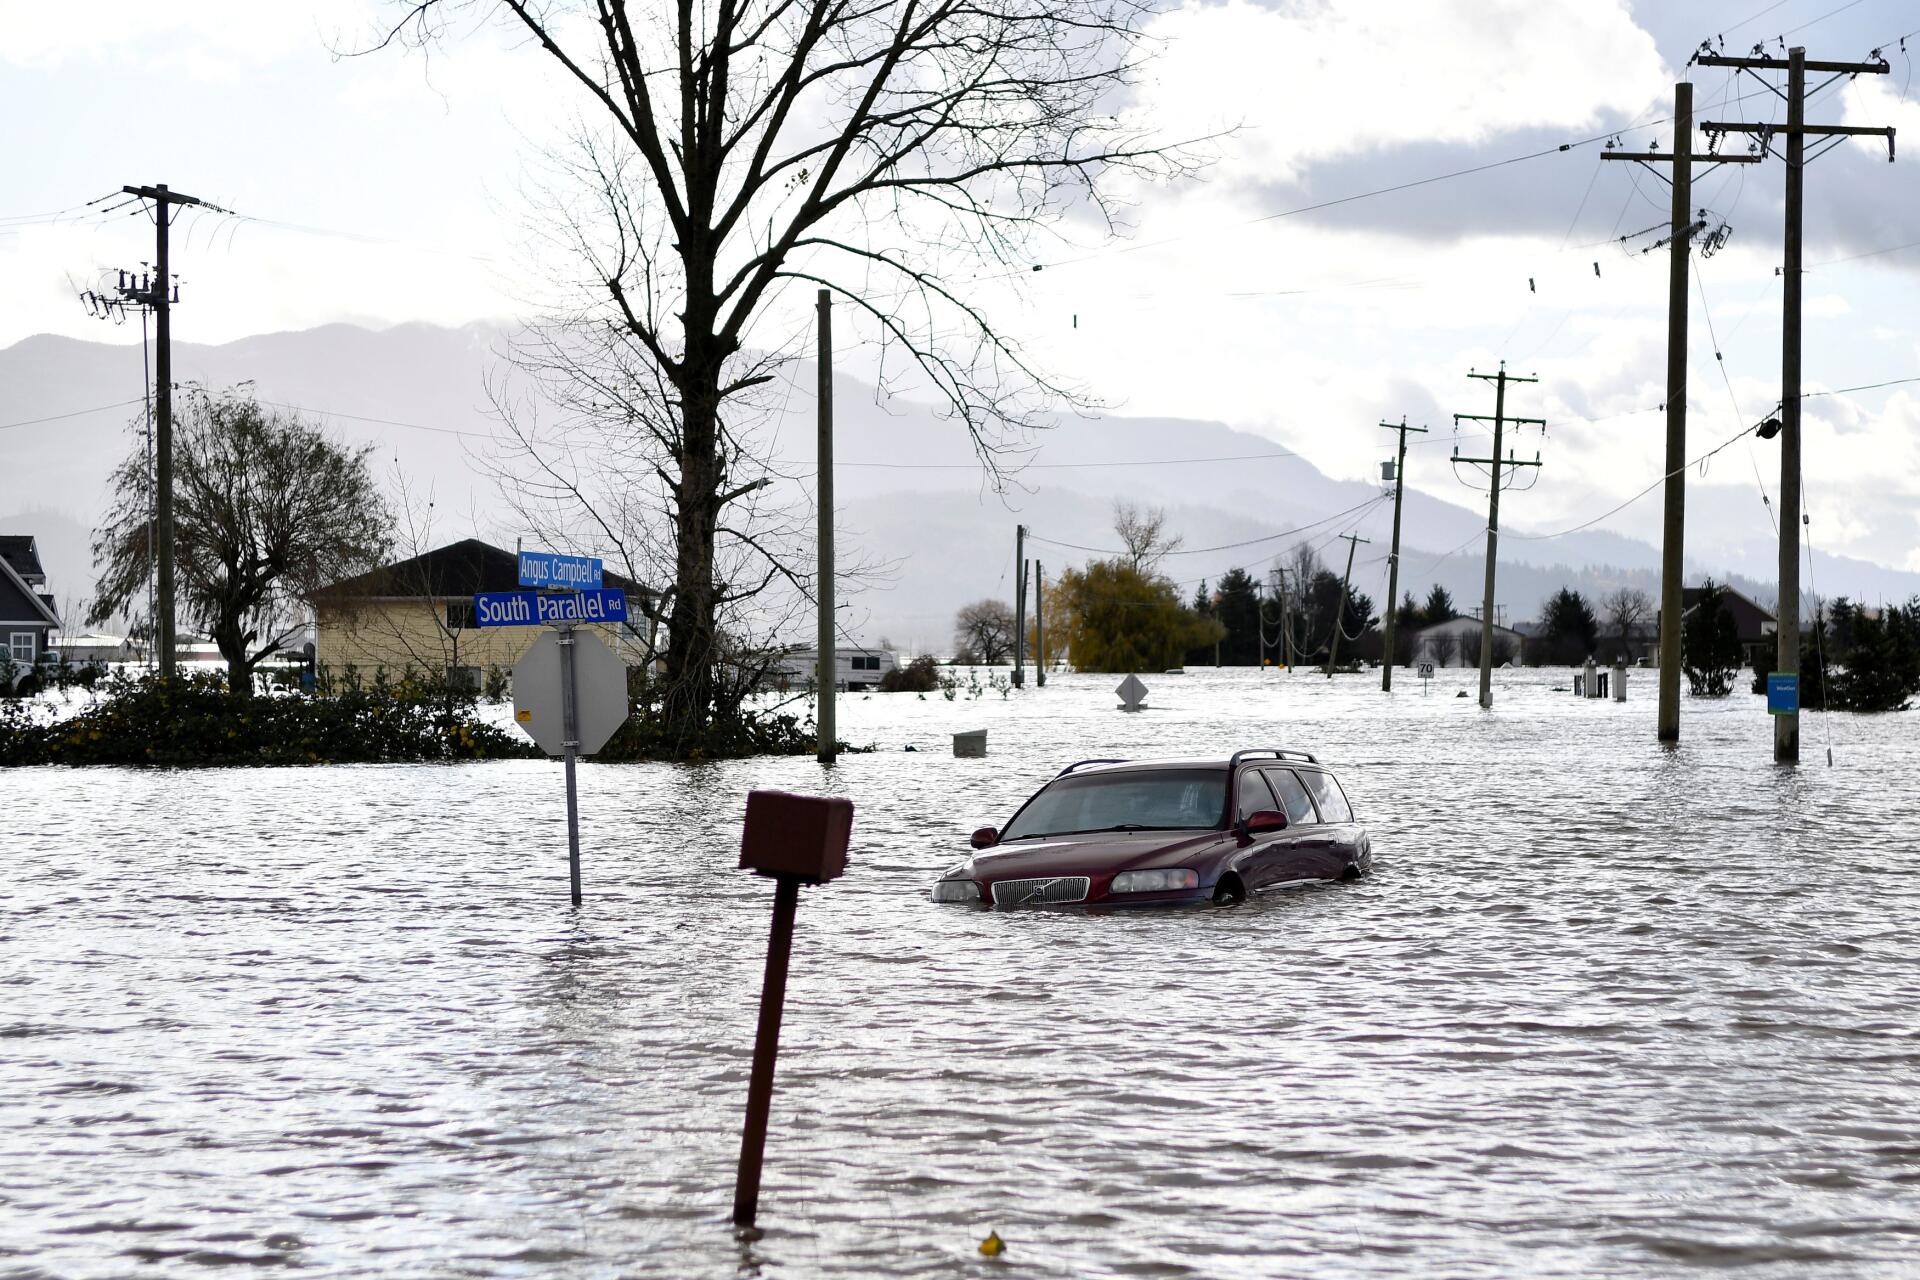 South Parallel Road is submerged in flood water in Abbotsford, British Columbia on November 16, 2021.